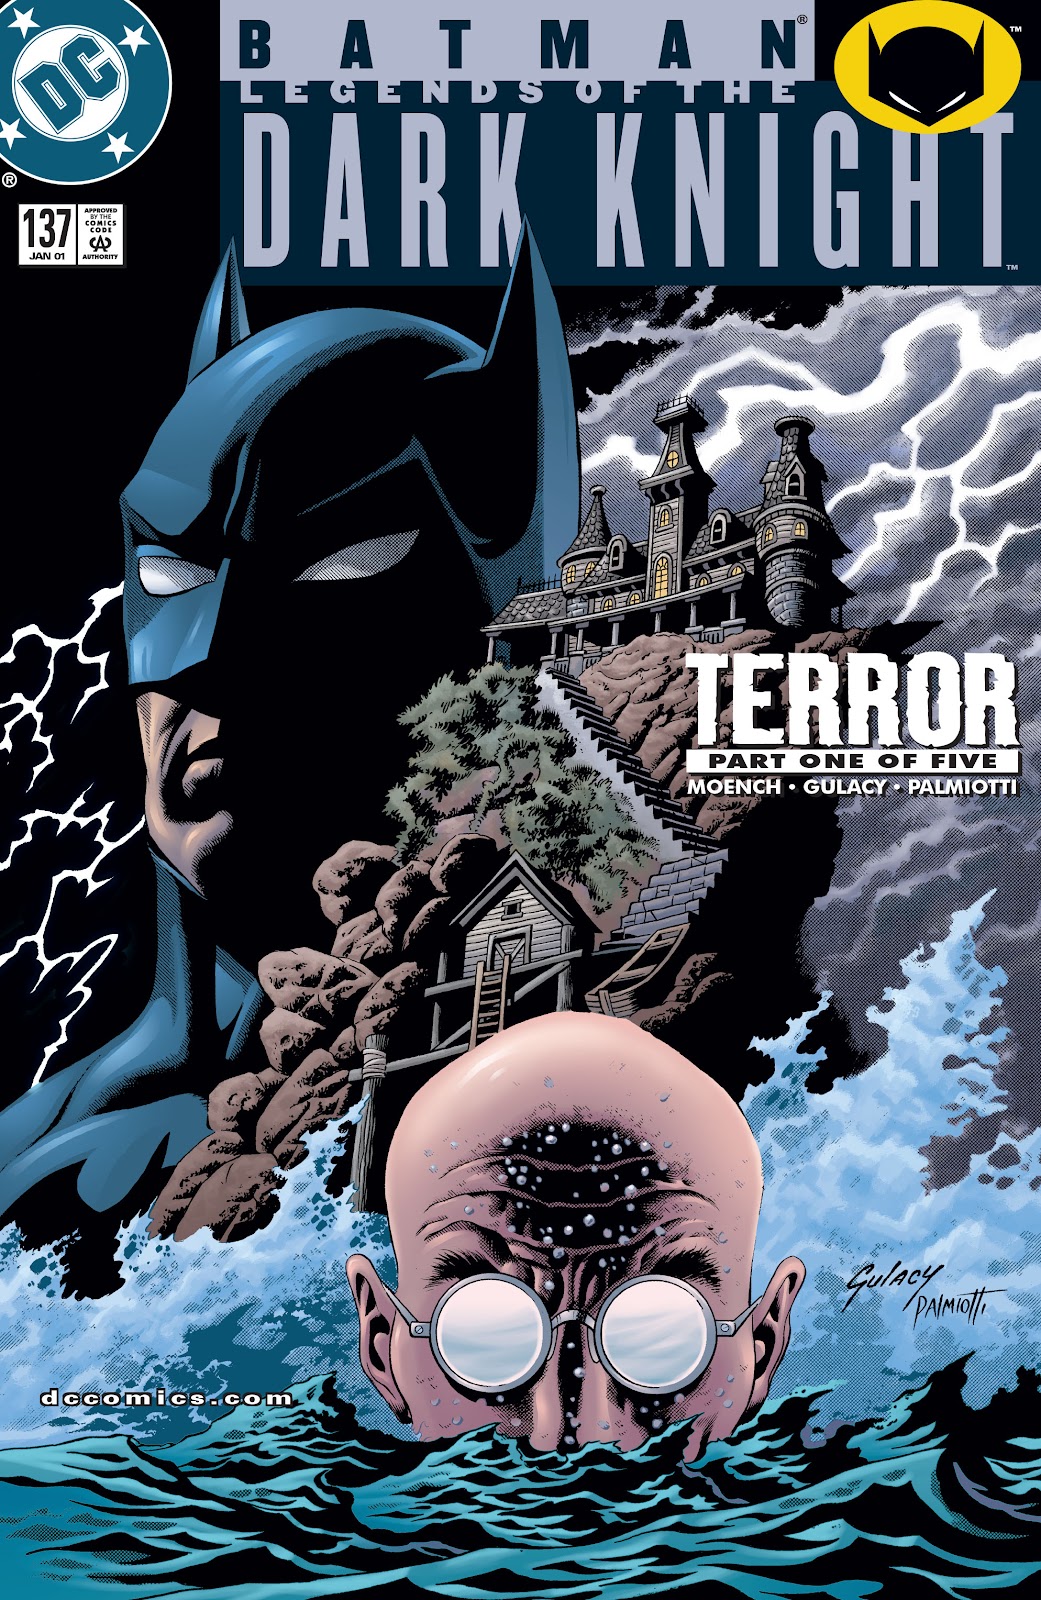 Batman: Legends of the Dark Knight issue 137 - Page 1